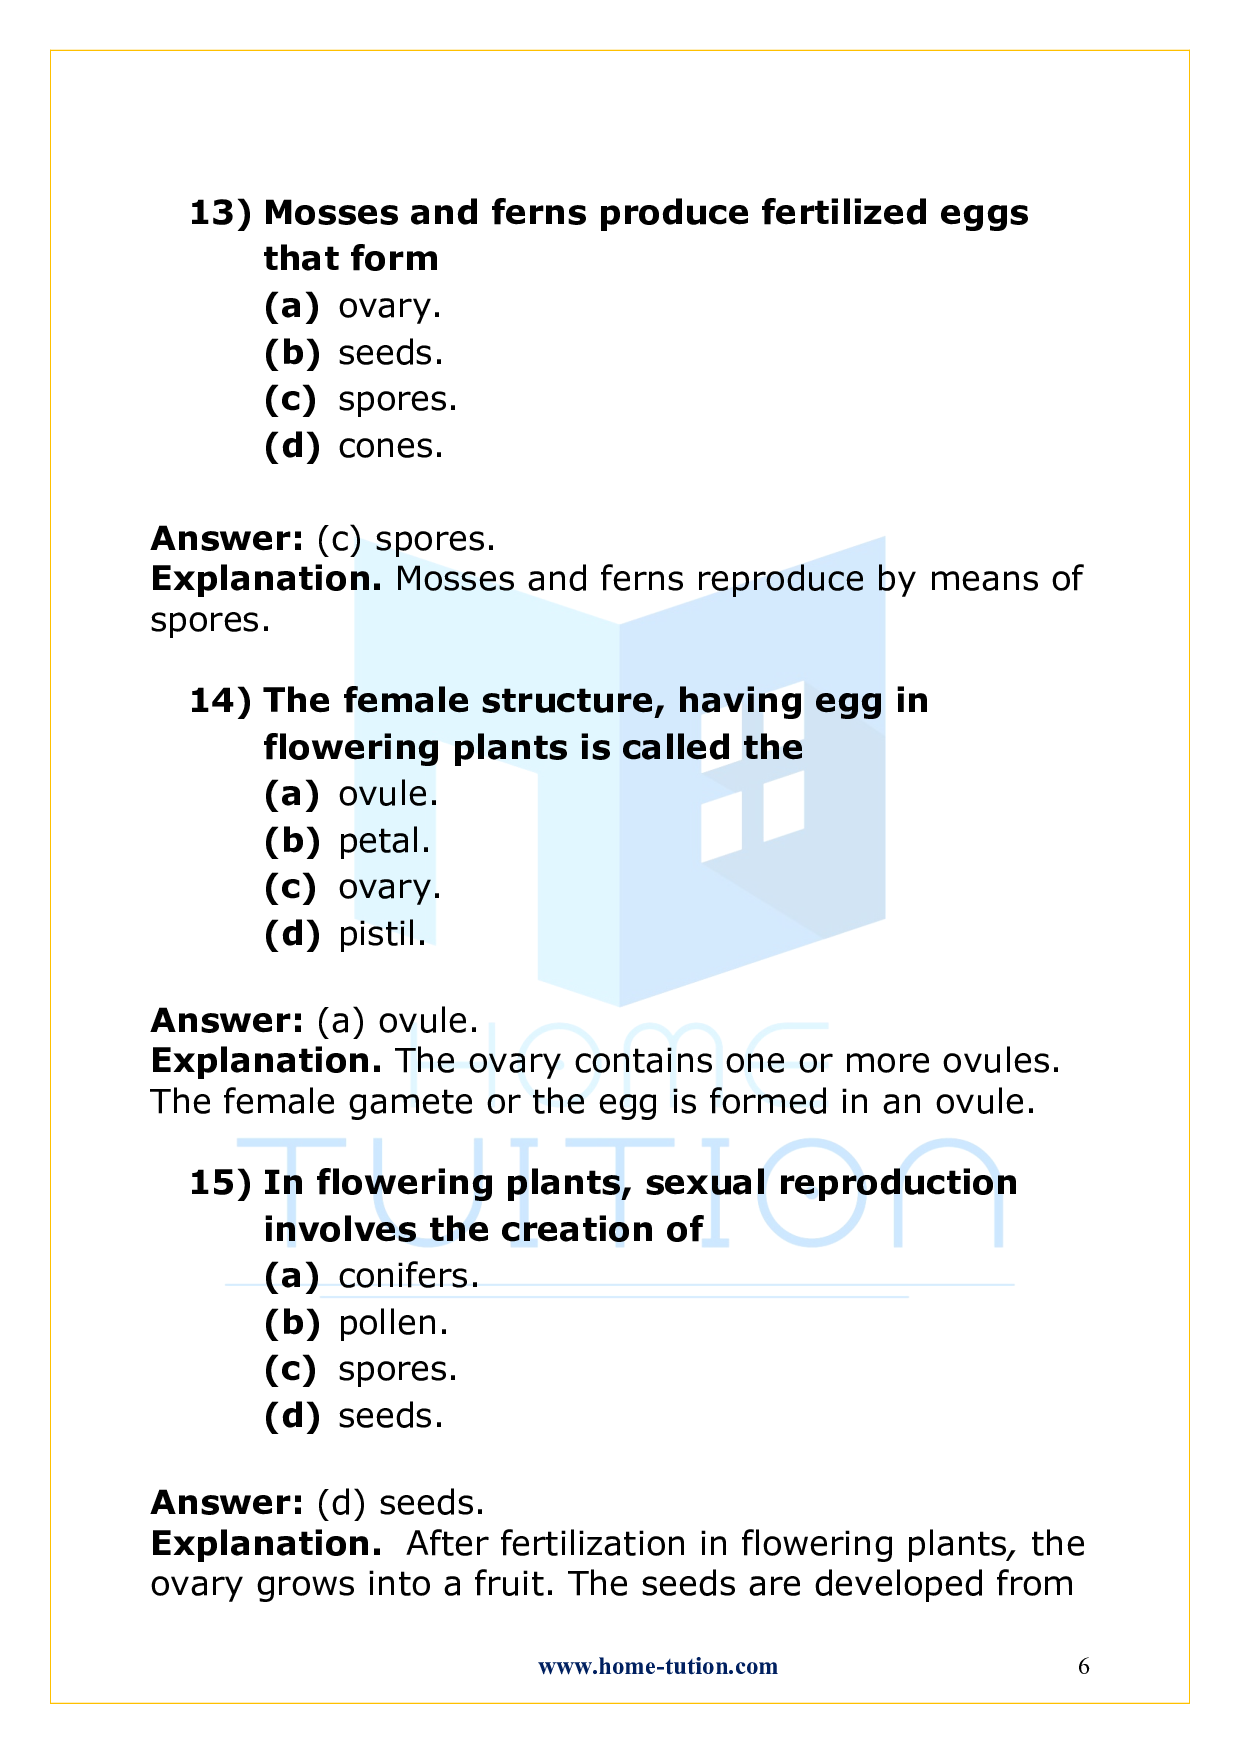 Chapter 12 Reproduction in Plants